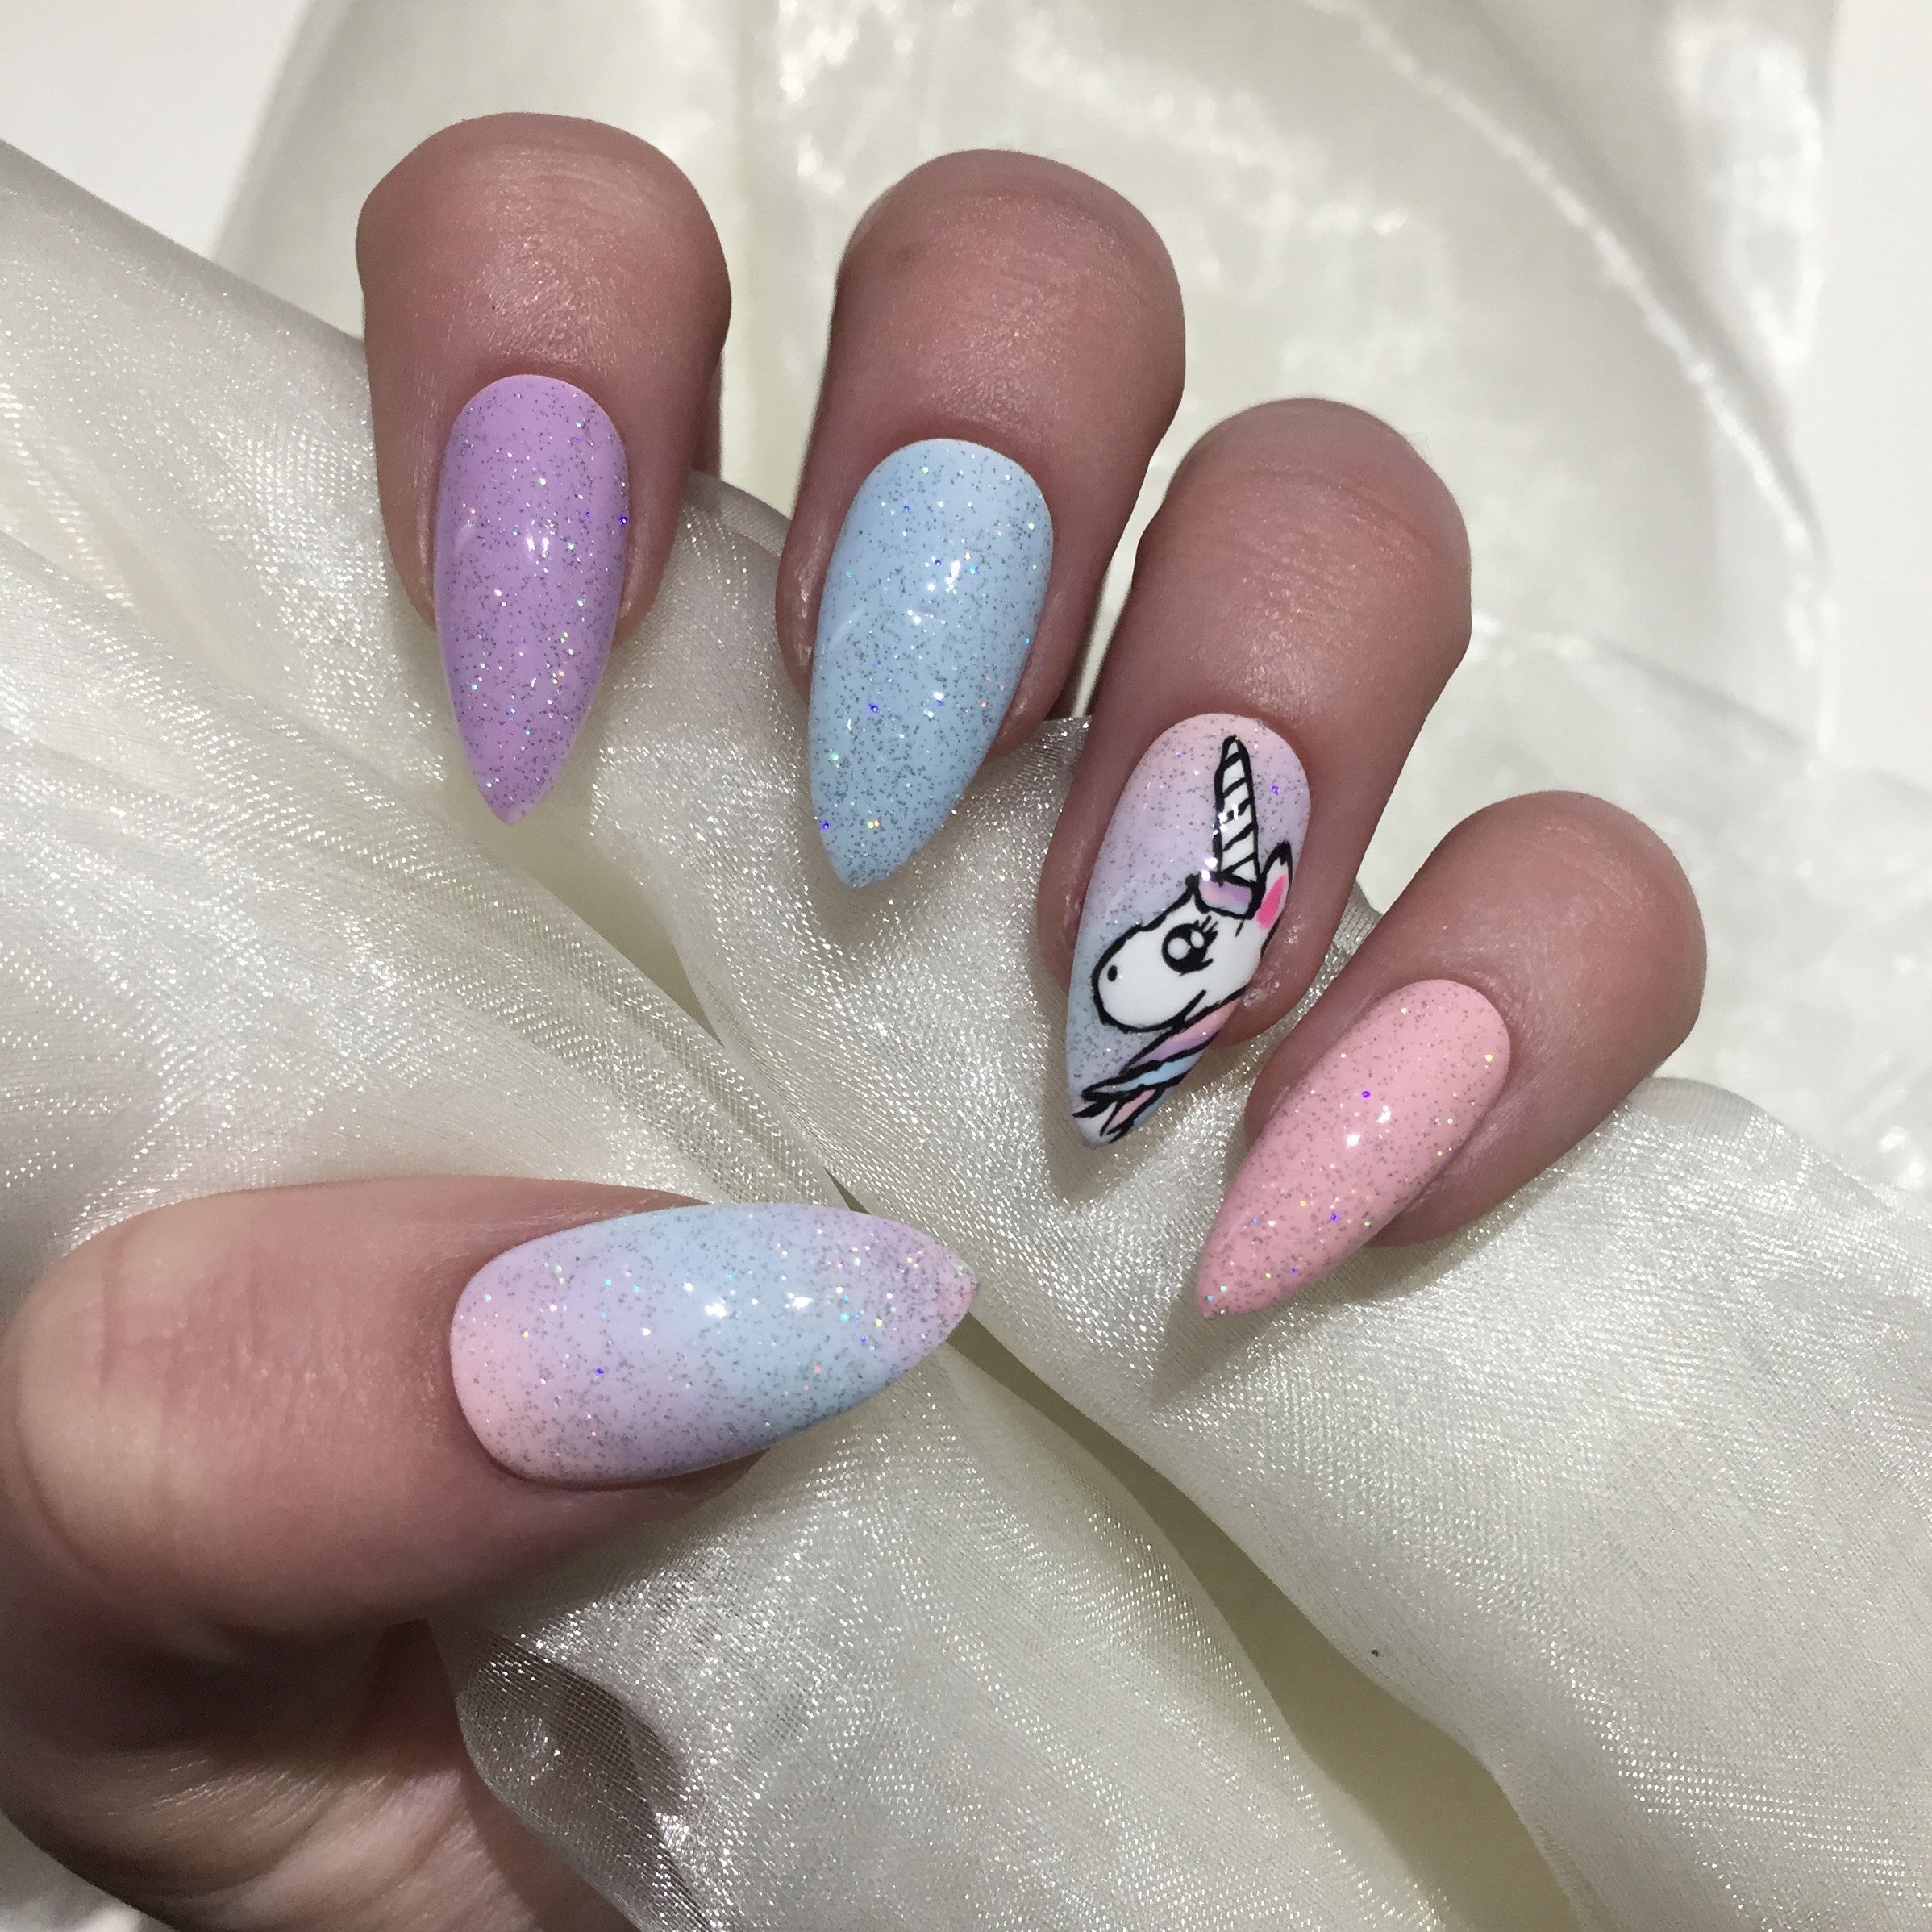 Mystical Unicorn Nails Designs for a Fairytale-Inspired Look